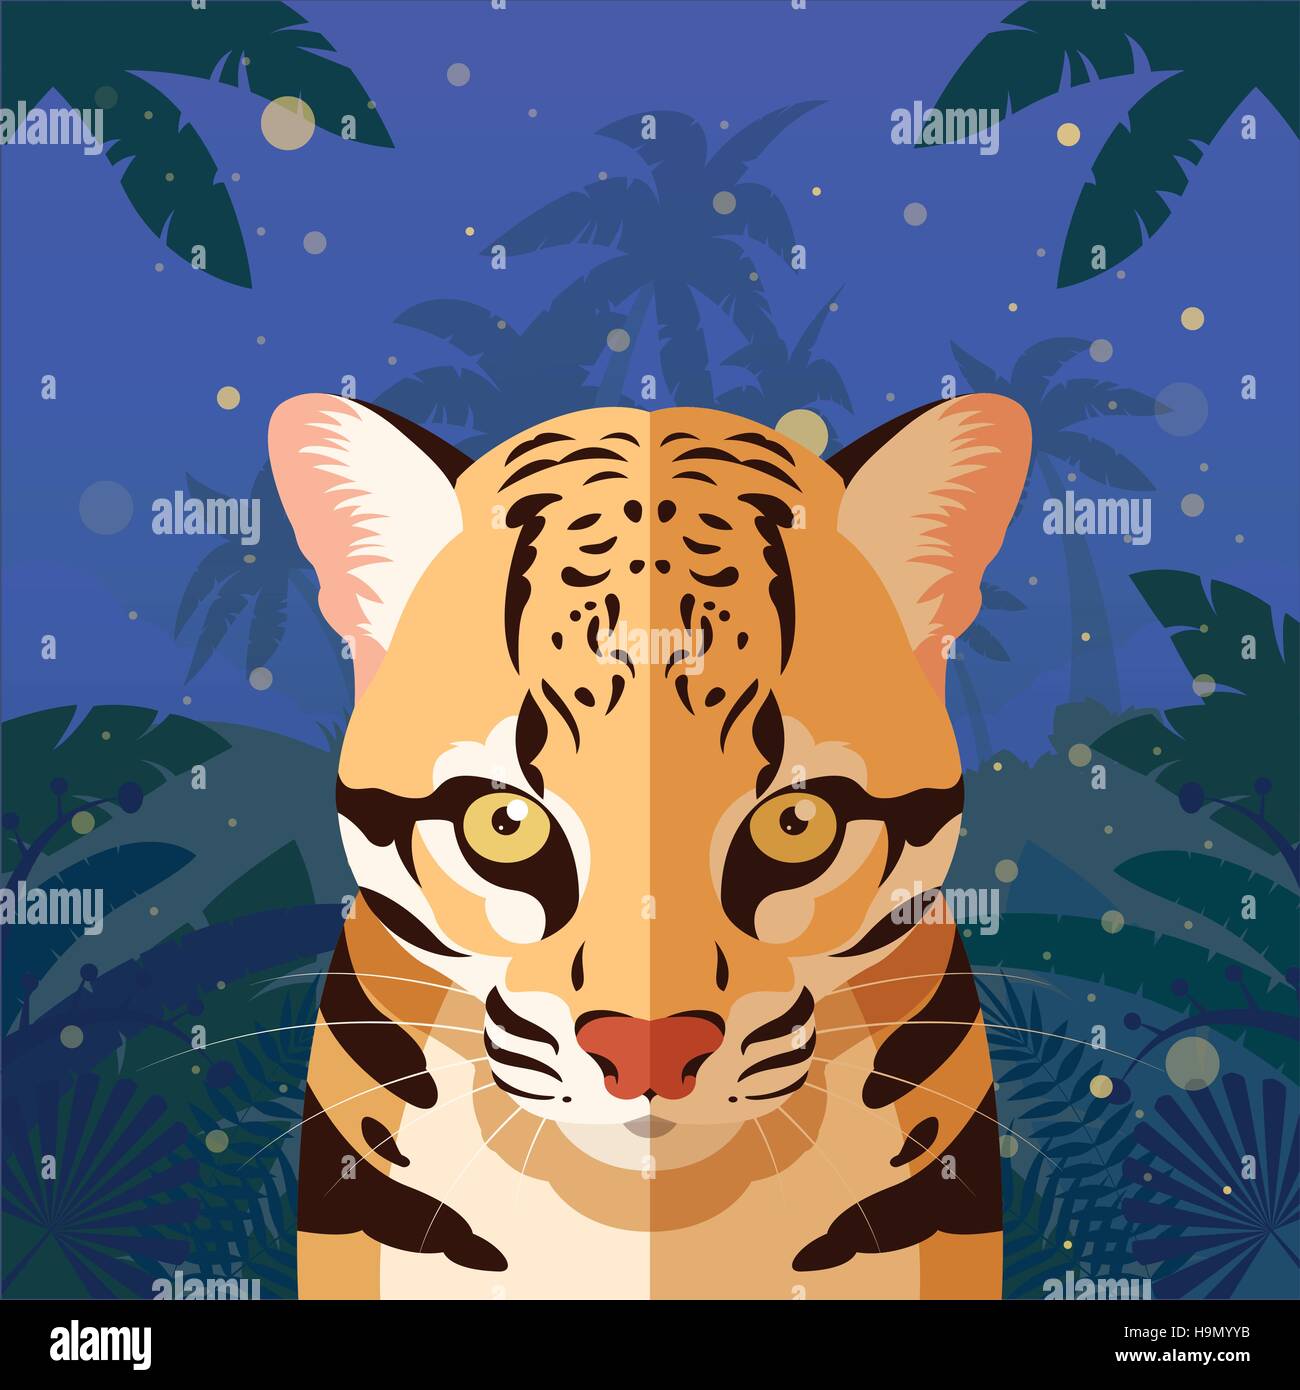 Flat Vector image of the Ocelot on the Jungle Background Stock Vector